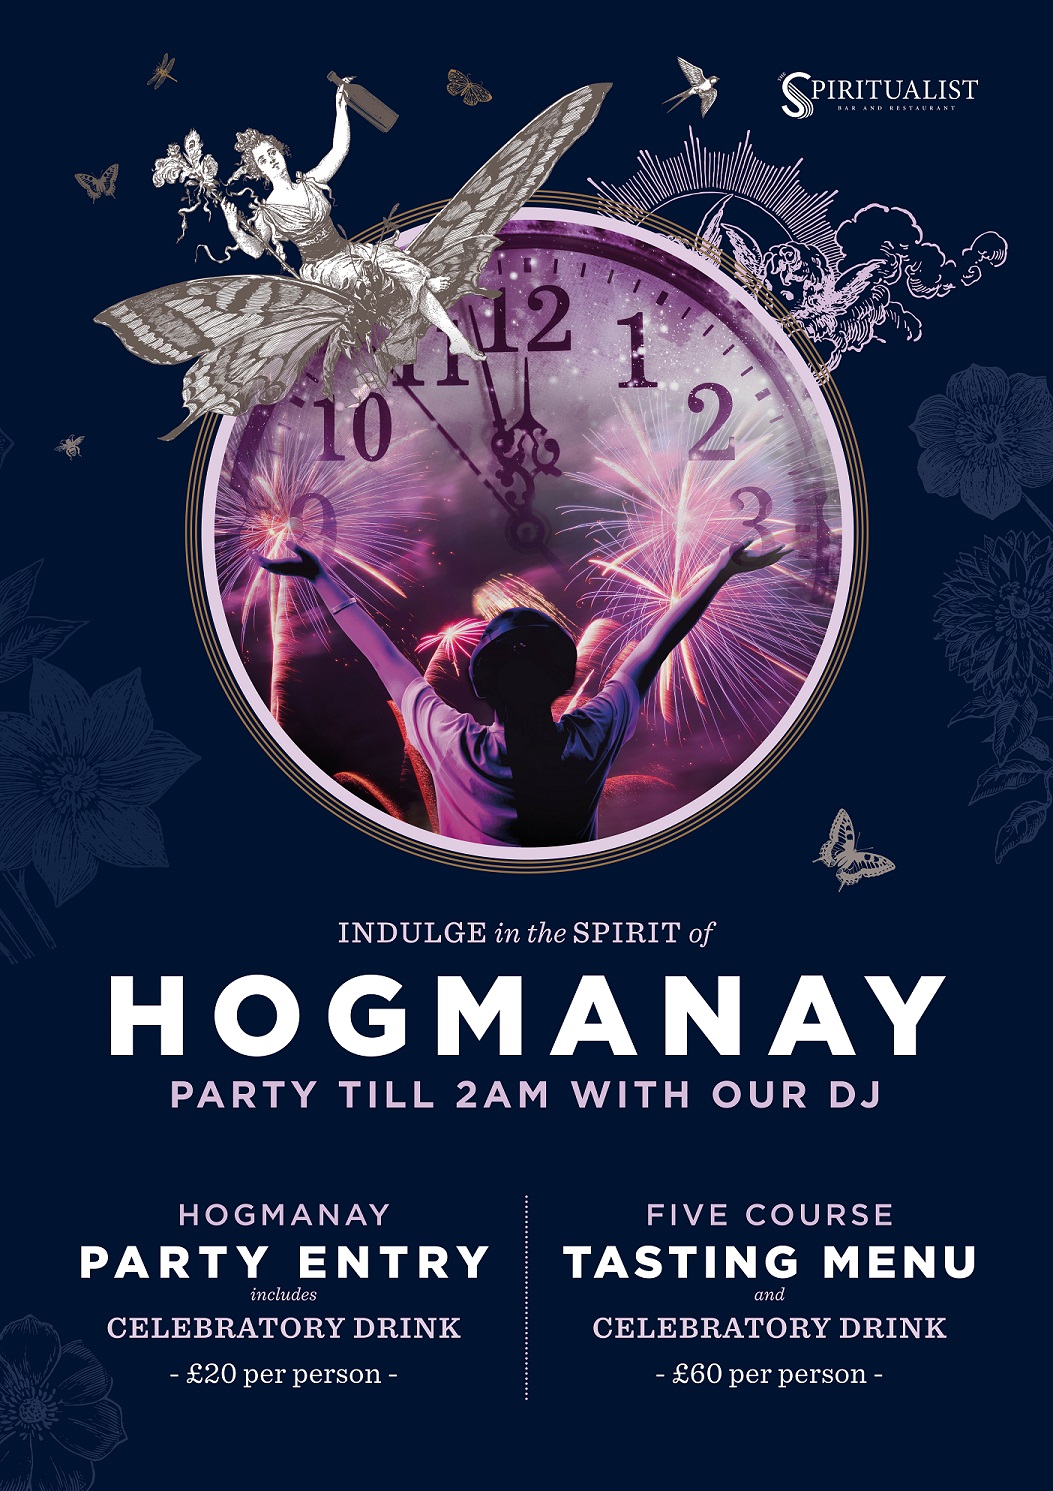 Hogmanay Party until 2am